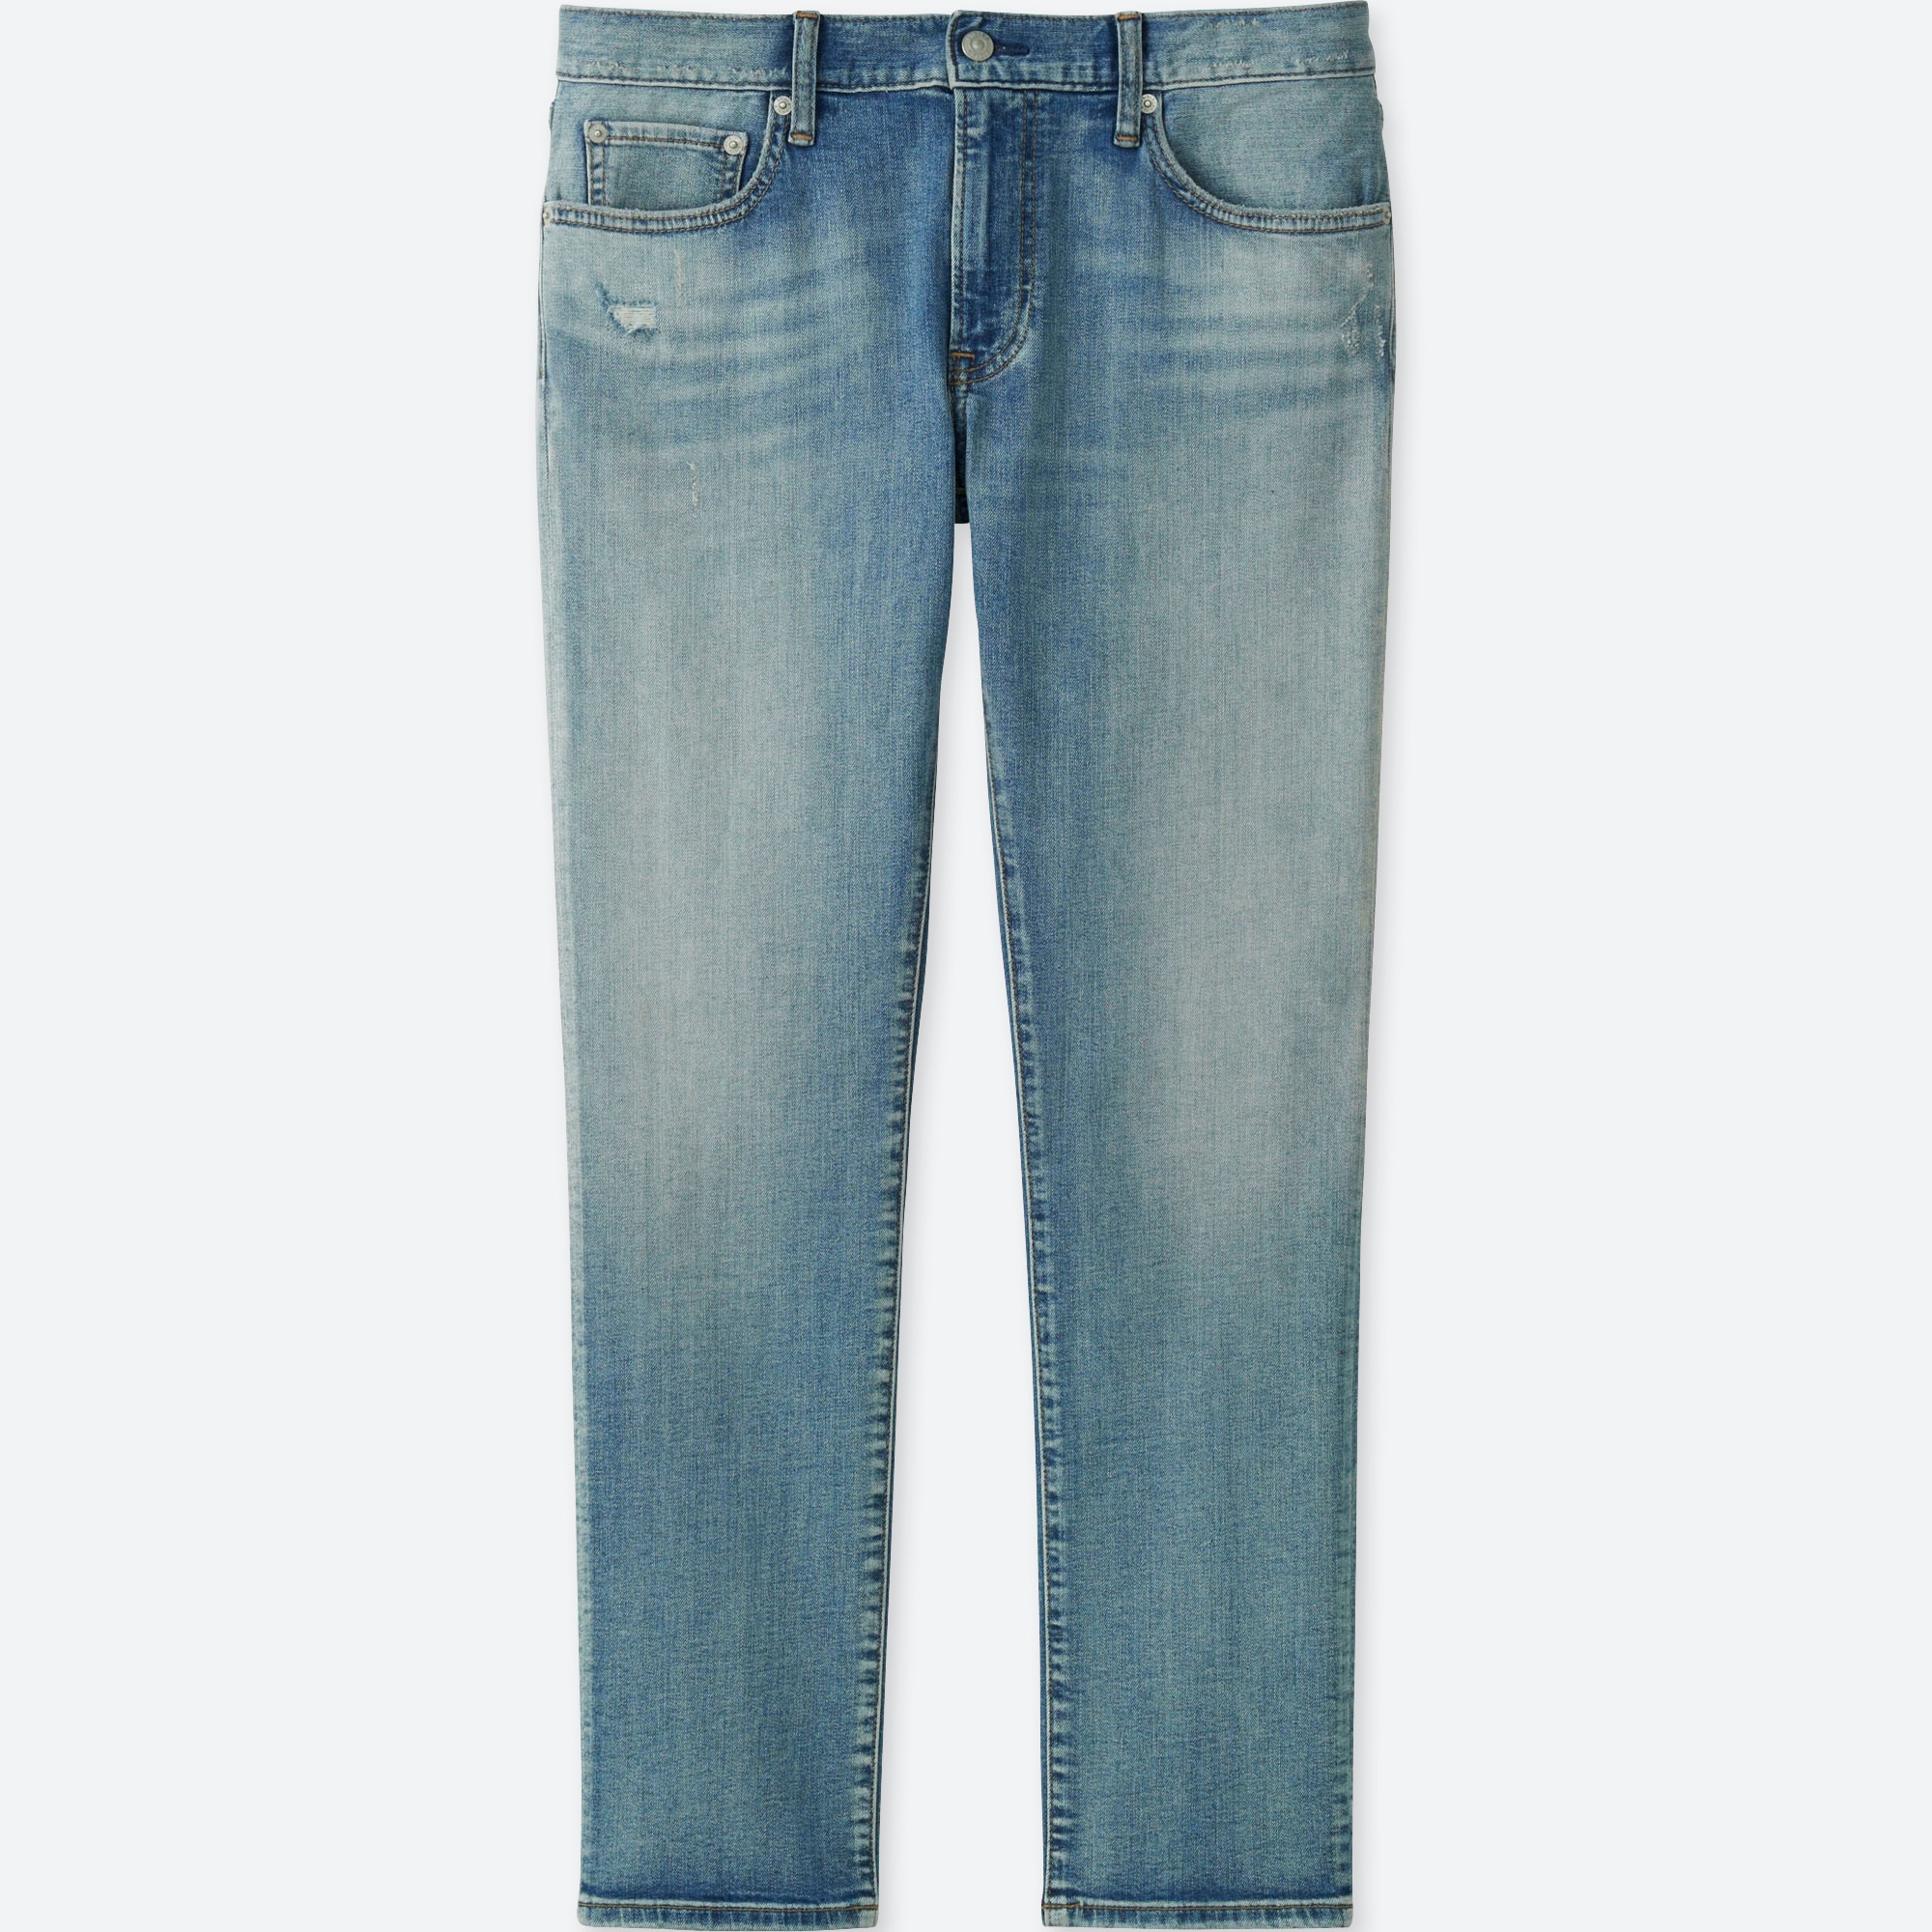 mens stretch distressed jeans